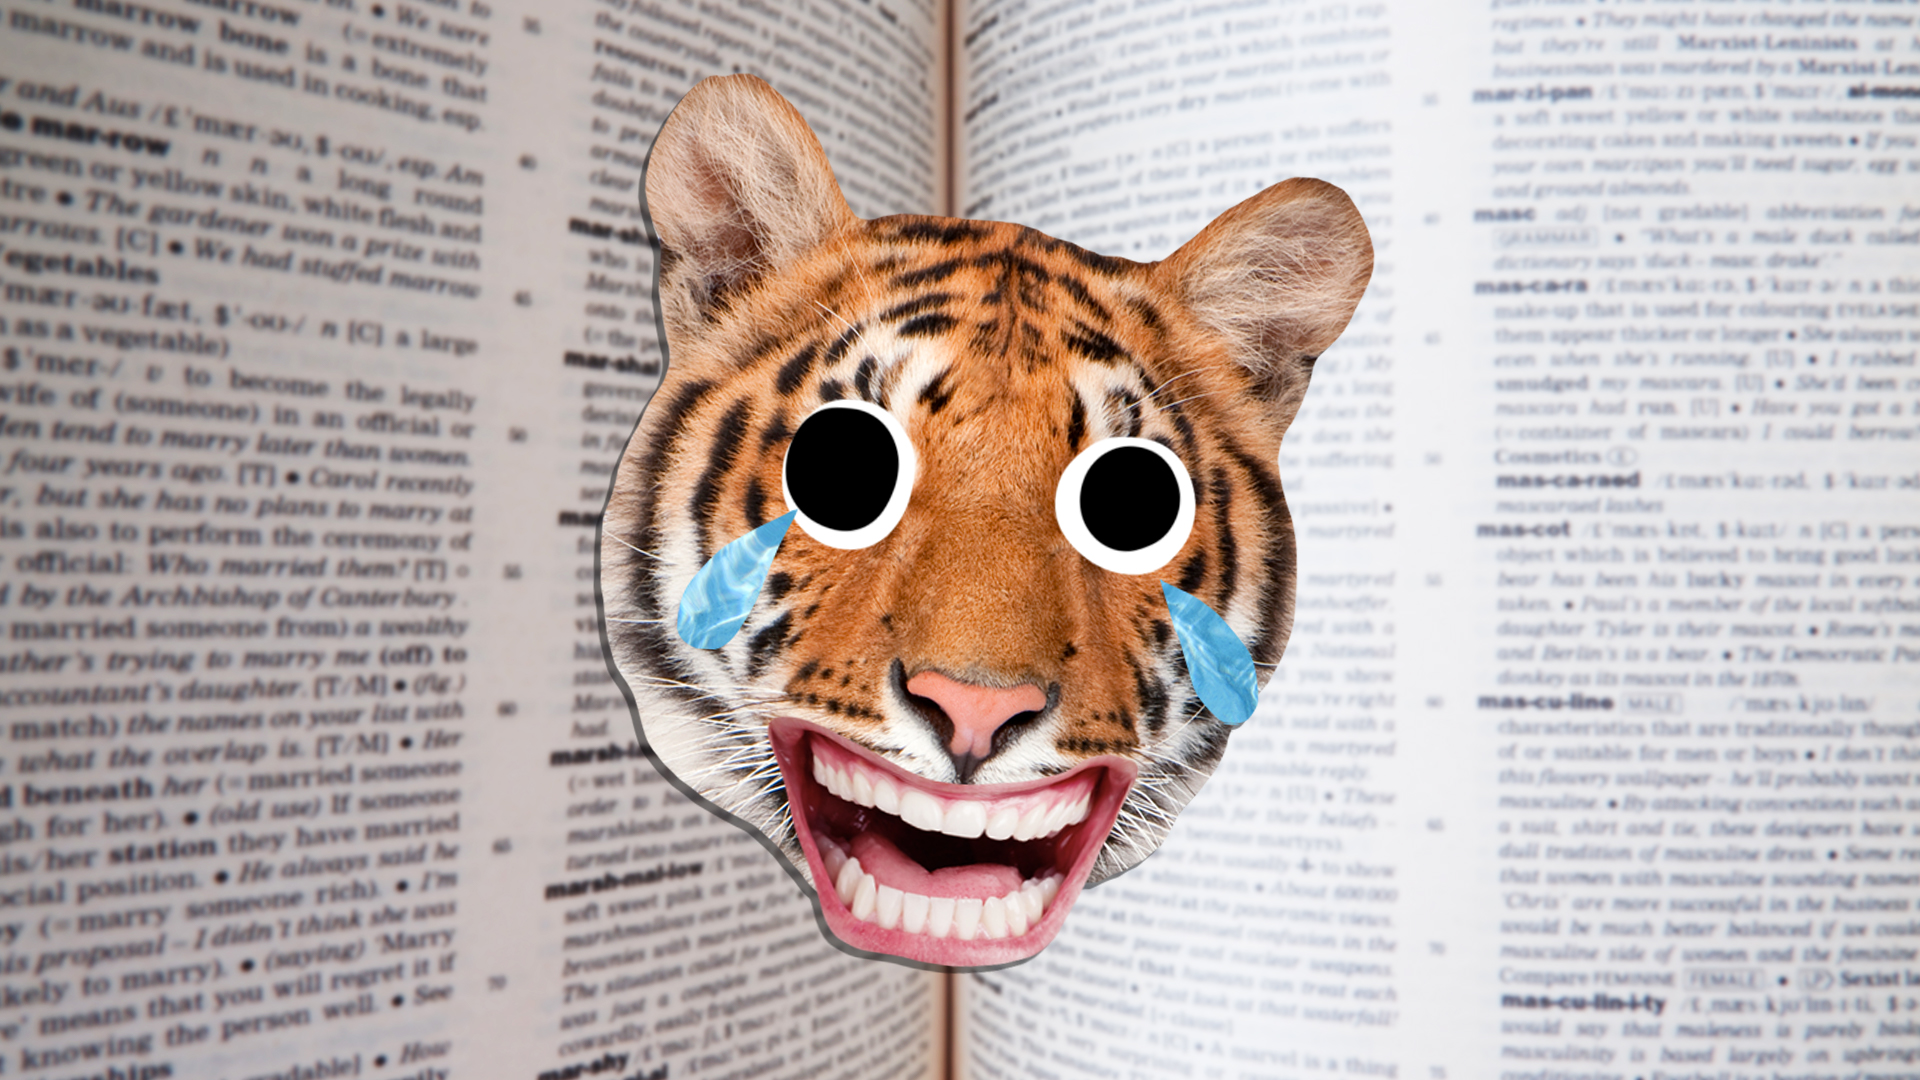 A laughing tiger and a dictionary in the background